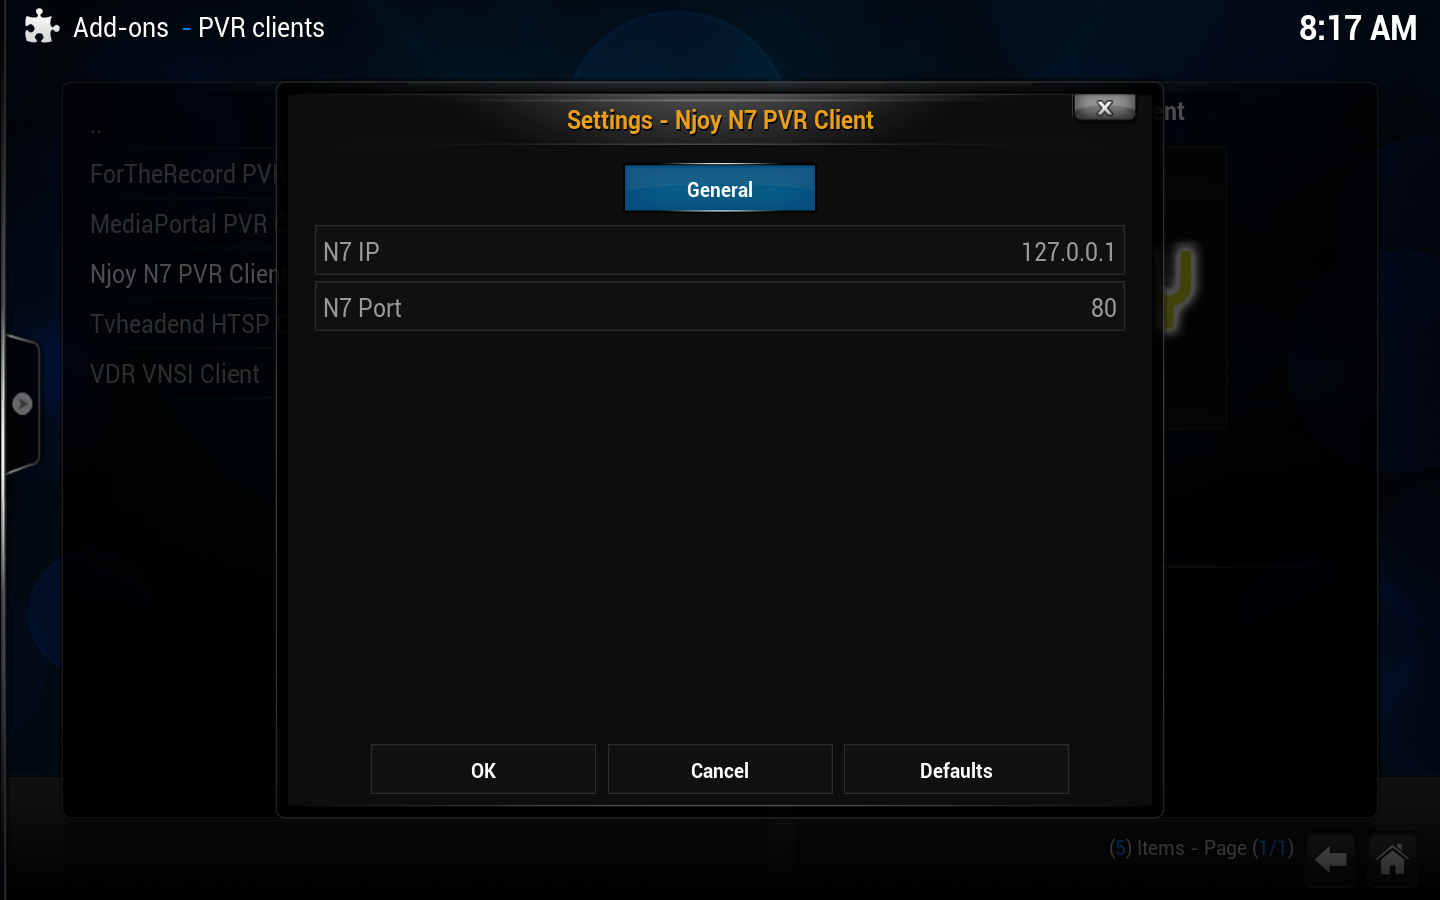 File:Njoy N7 PVR Client.settings.png